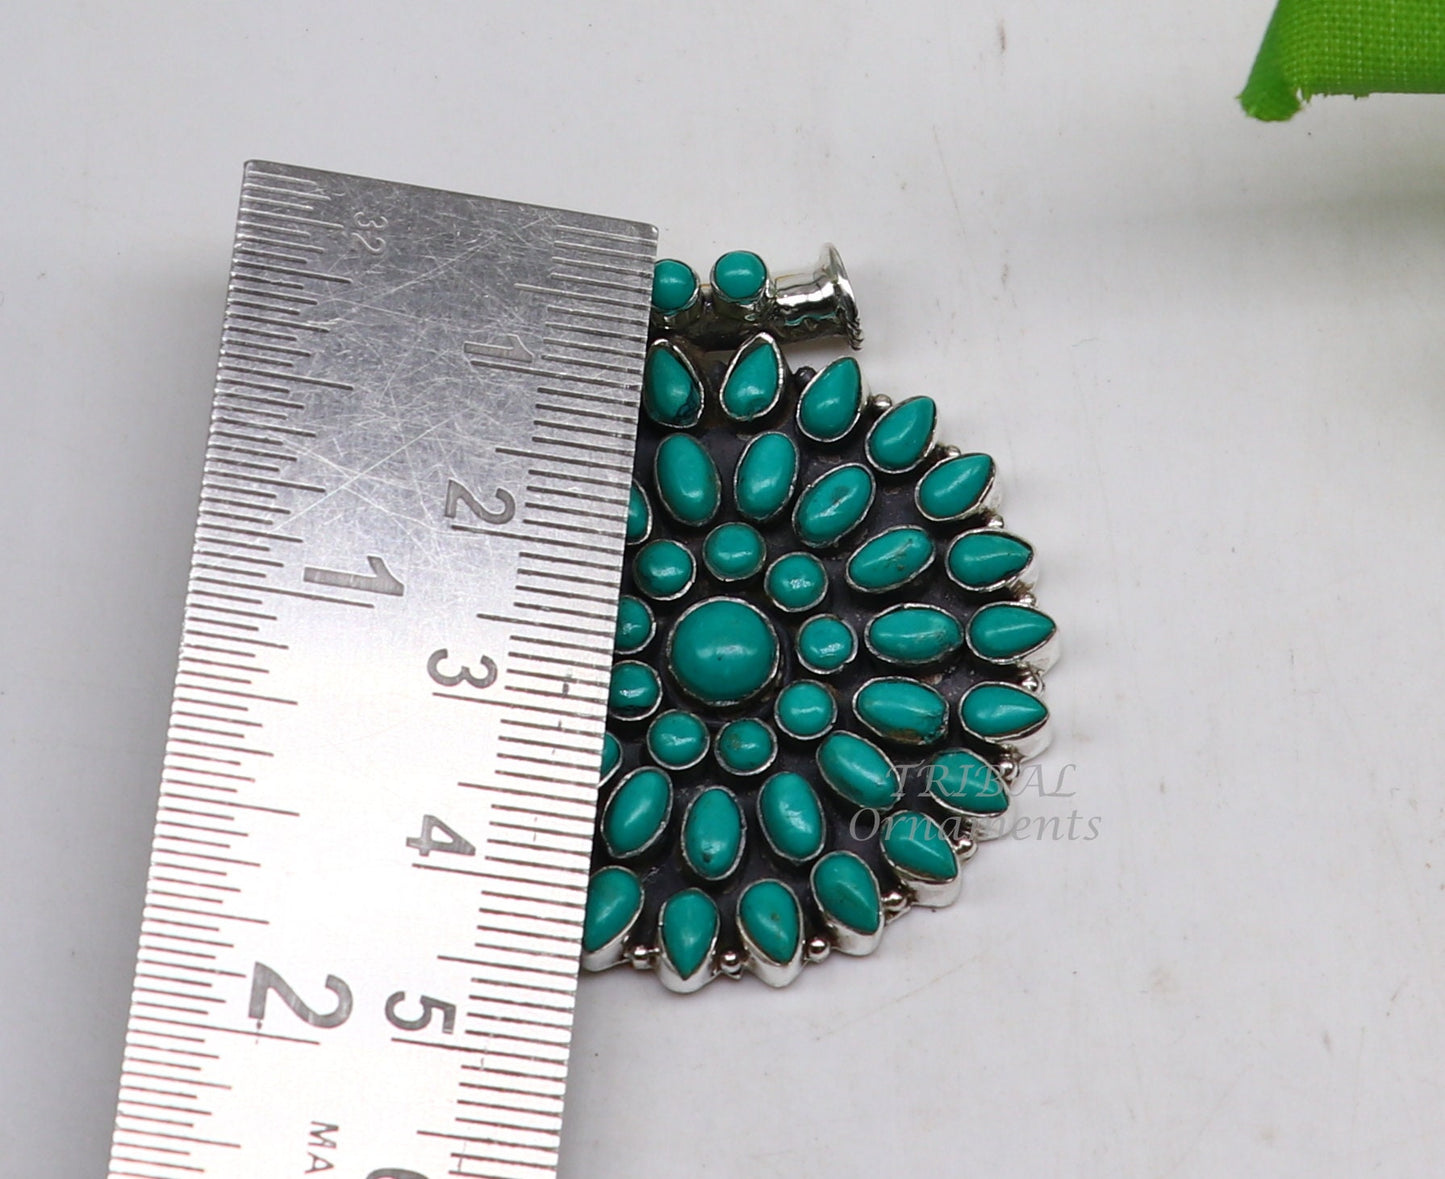 Vintage antique design handmade 925 sterling silver fabulous turquoise stone pendant wedding women's ethnic tribal jewelry nsp528 - TRIBAL ORNAMENTS